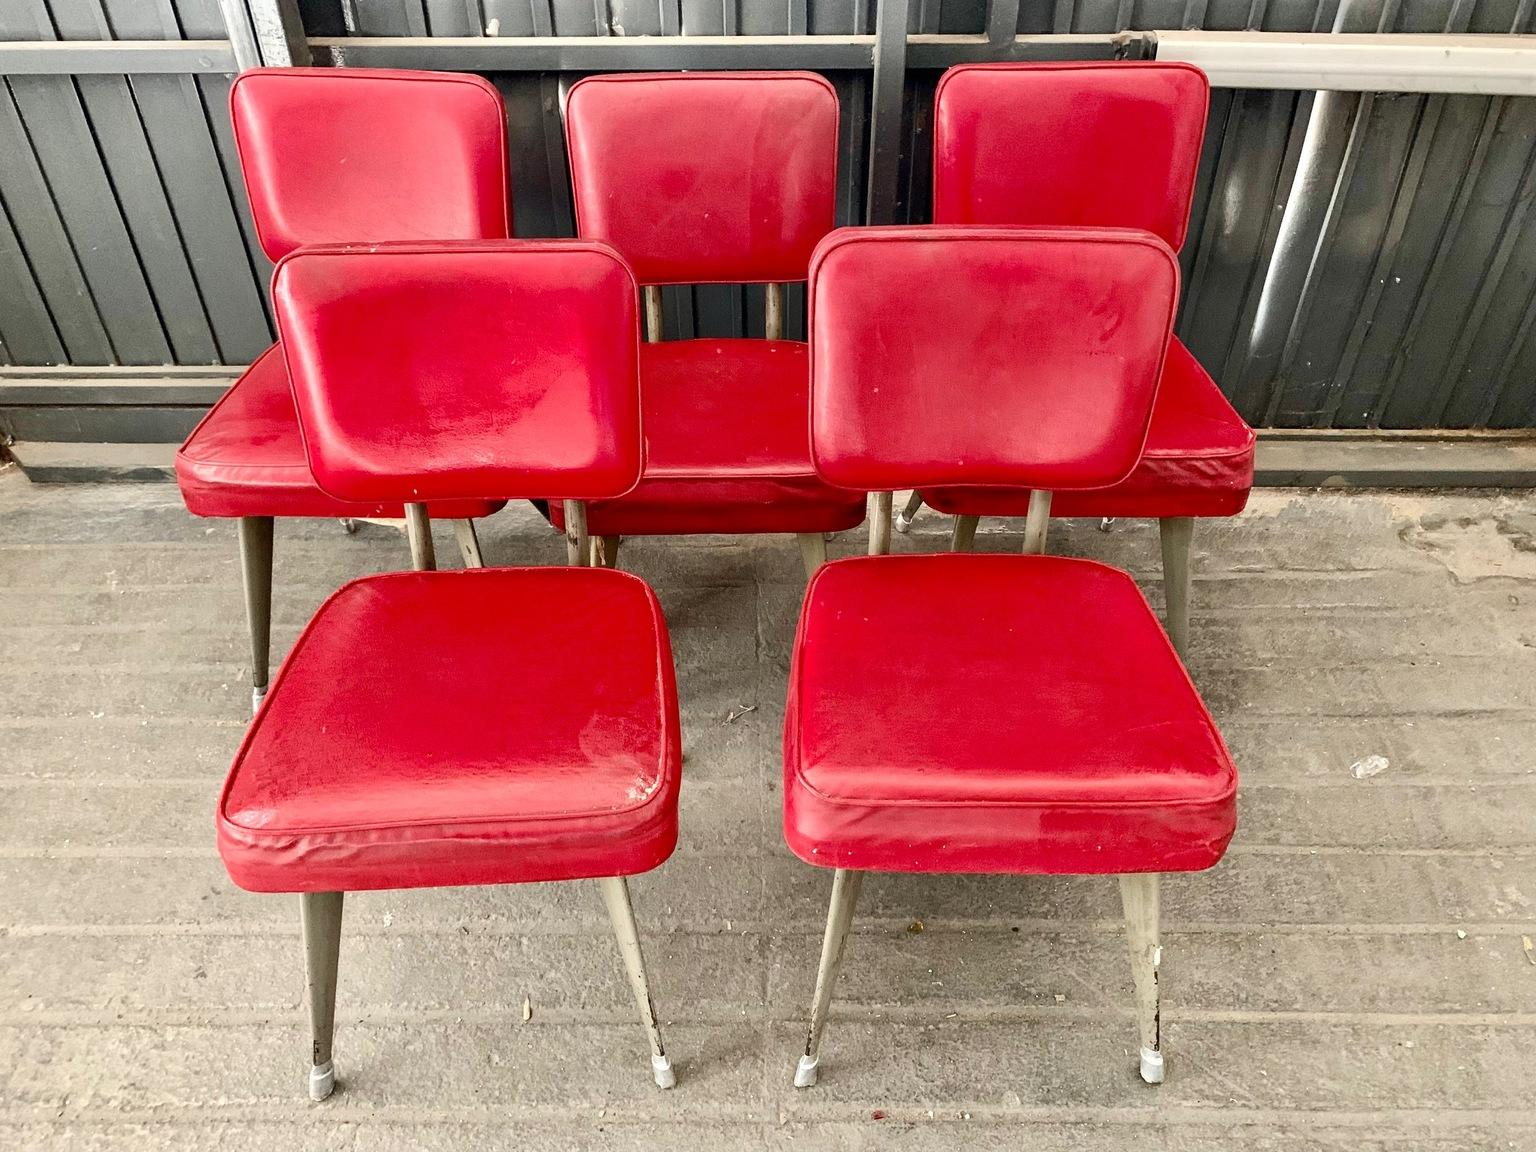 Set of five chairs of Italian industrial design from the 1960s, chromed metal frame and upholstered in red faux leather.